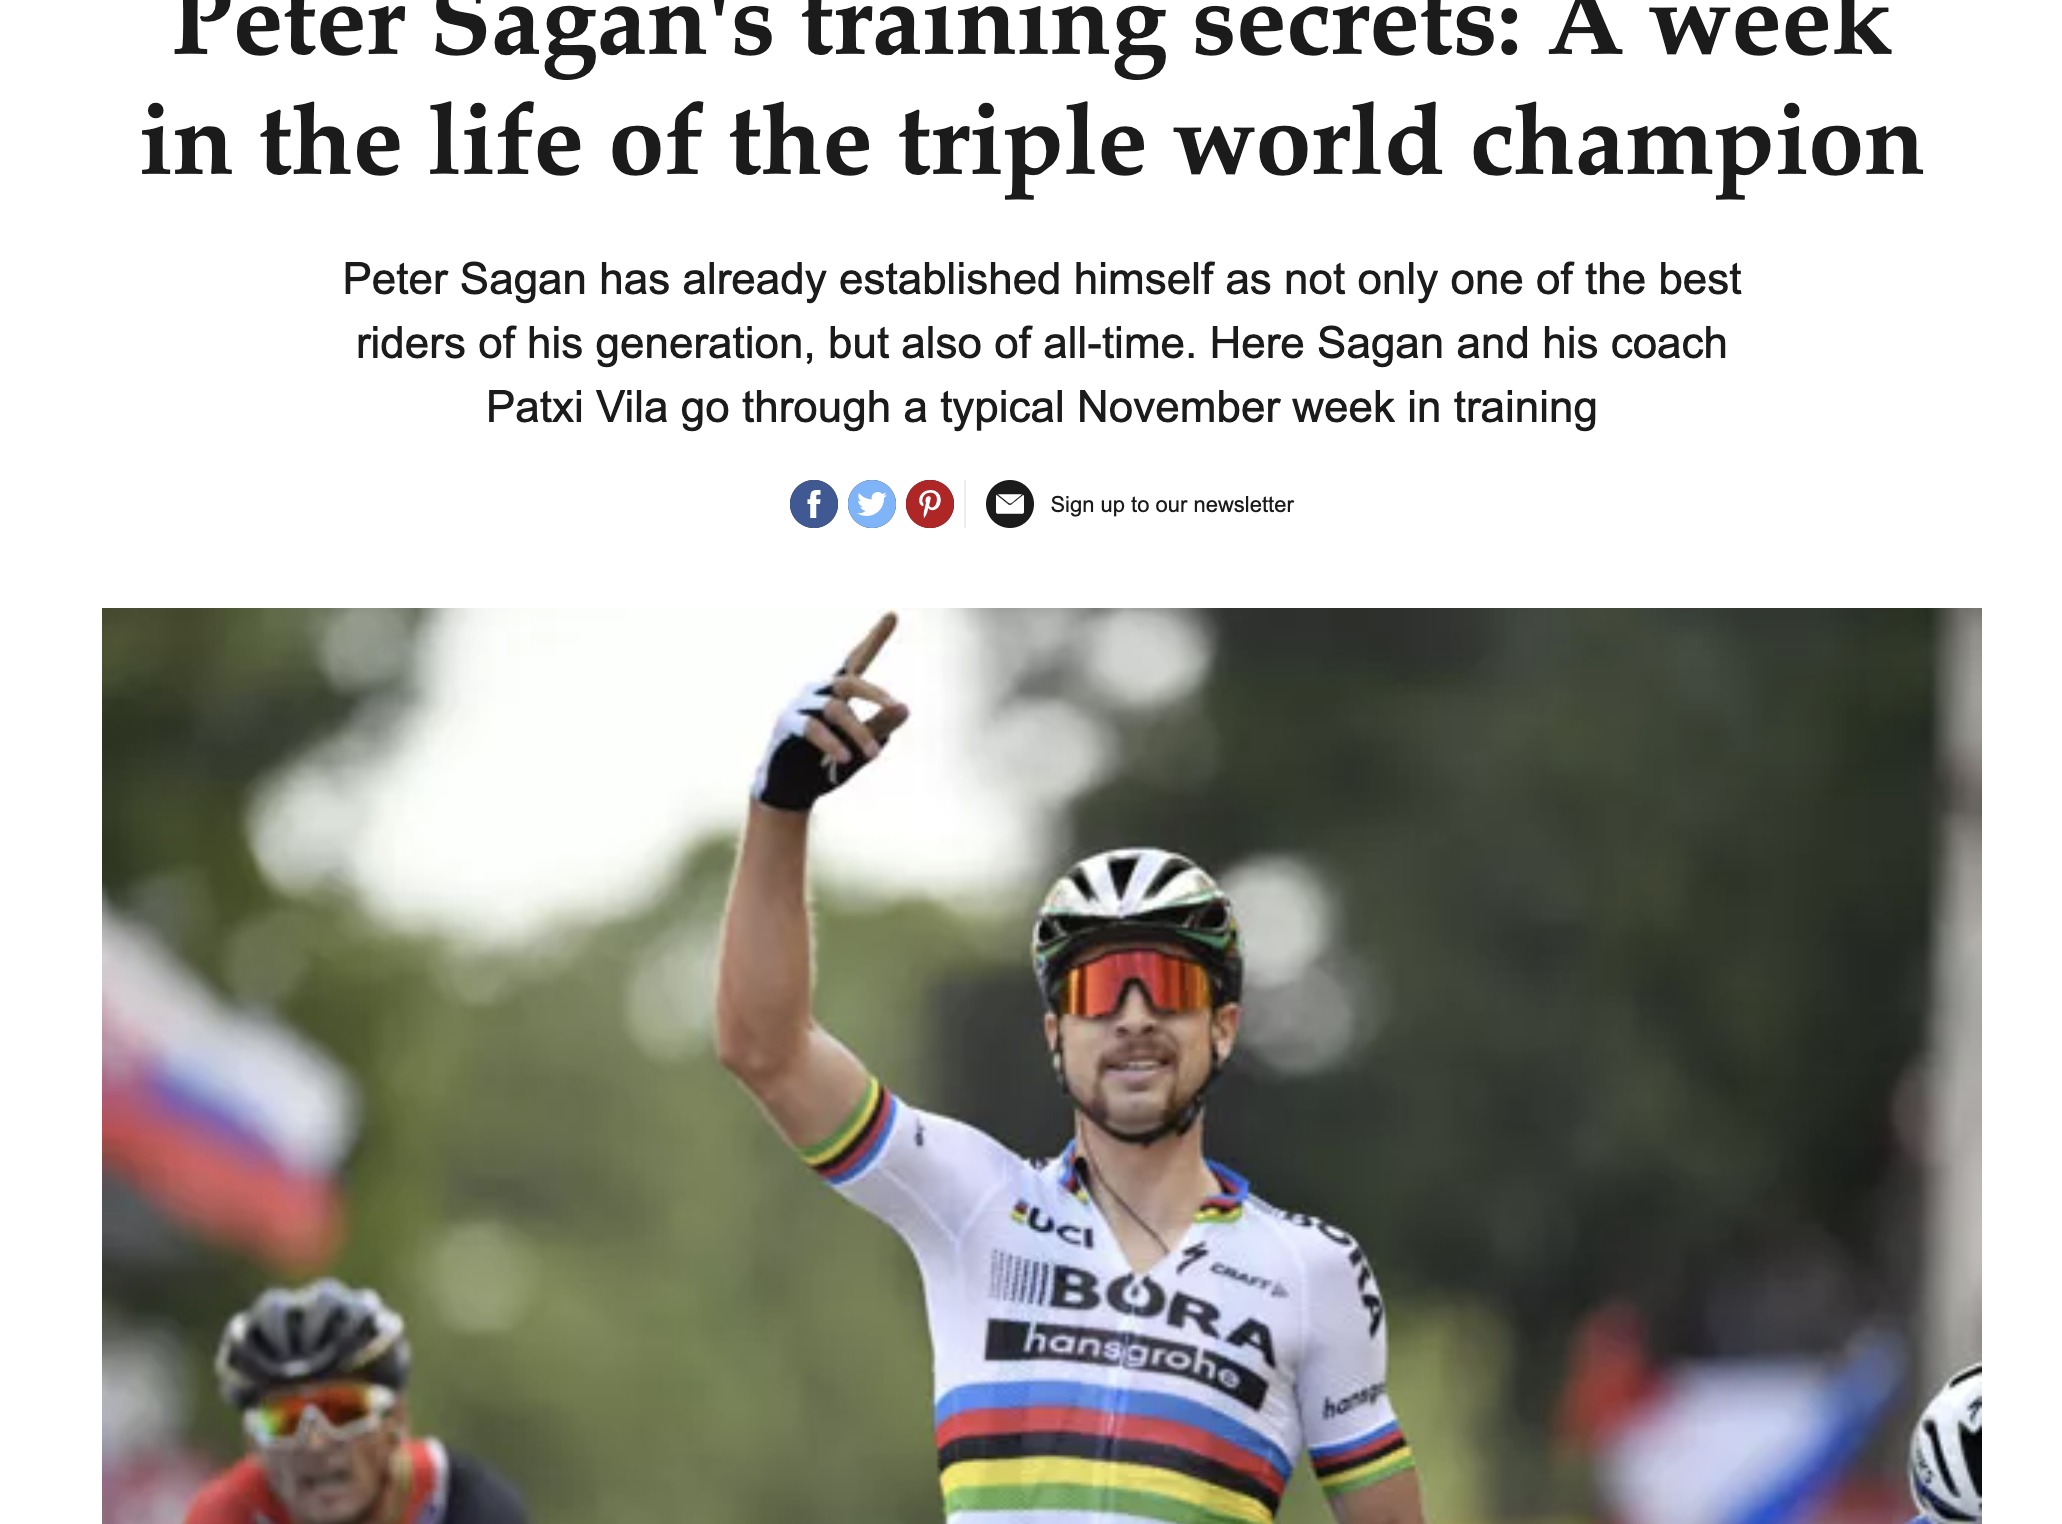 Peter Sagan's training secrets: A week in the life of the triple world champion